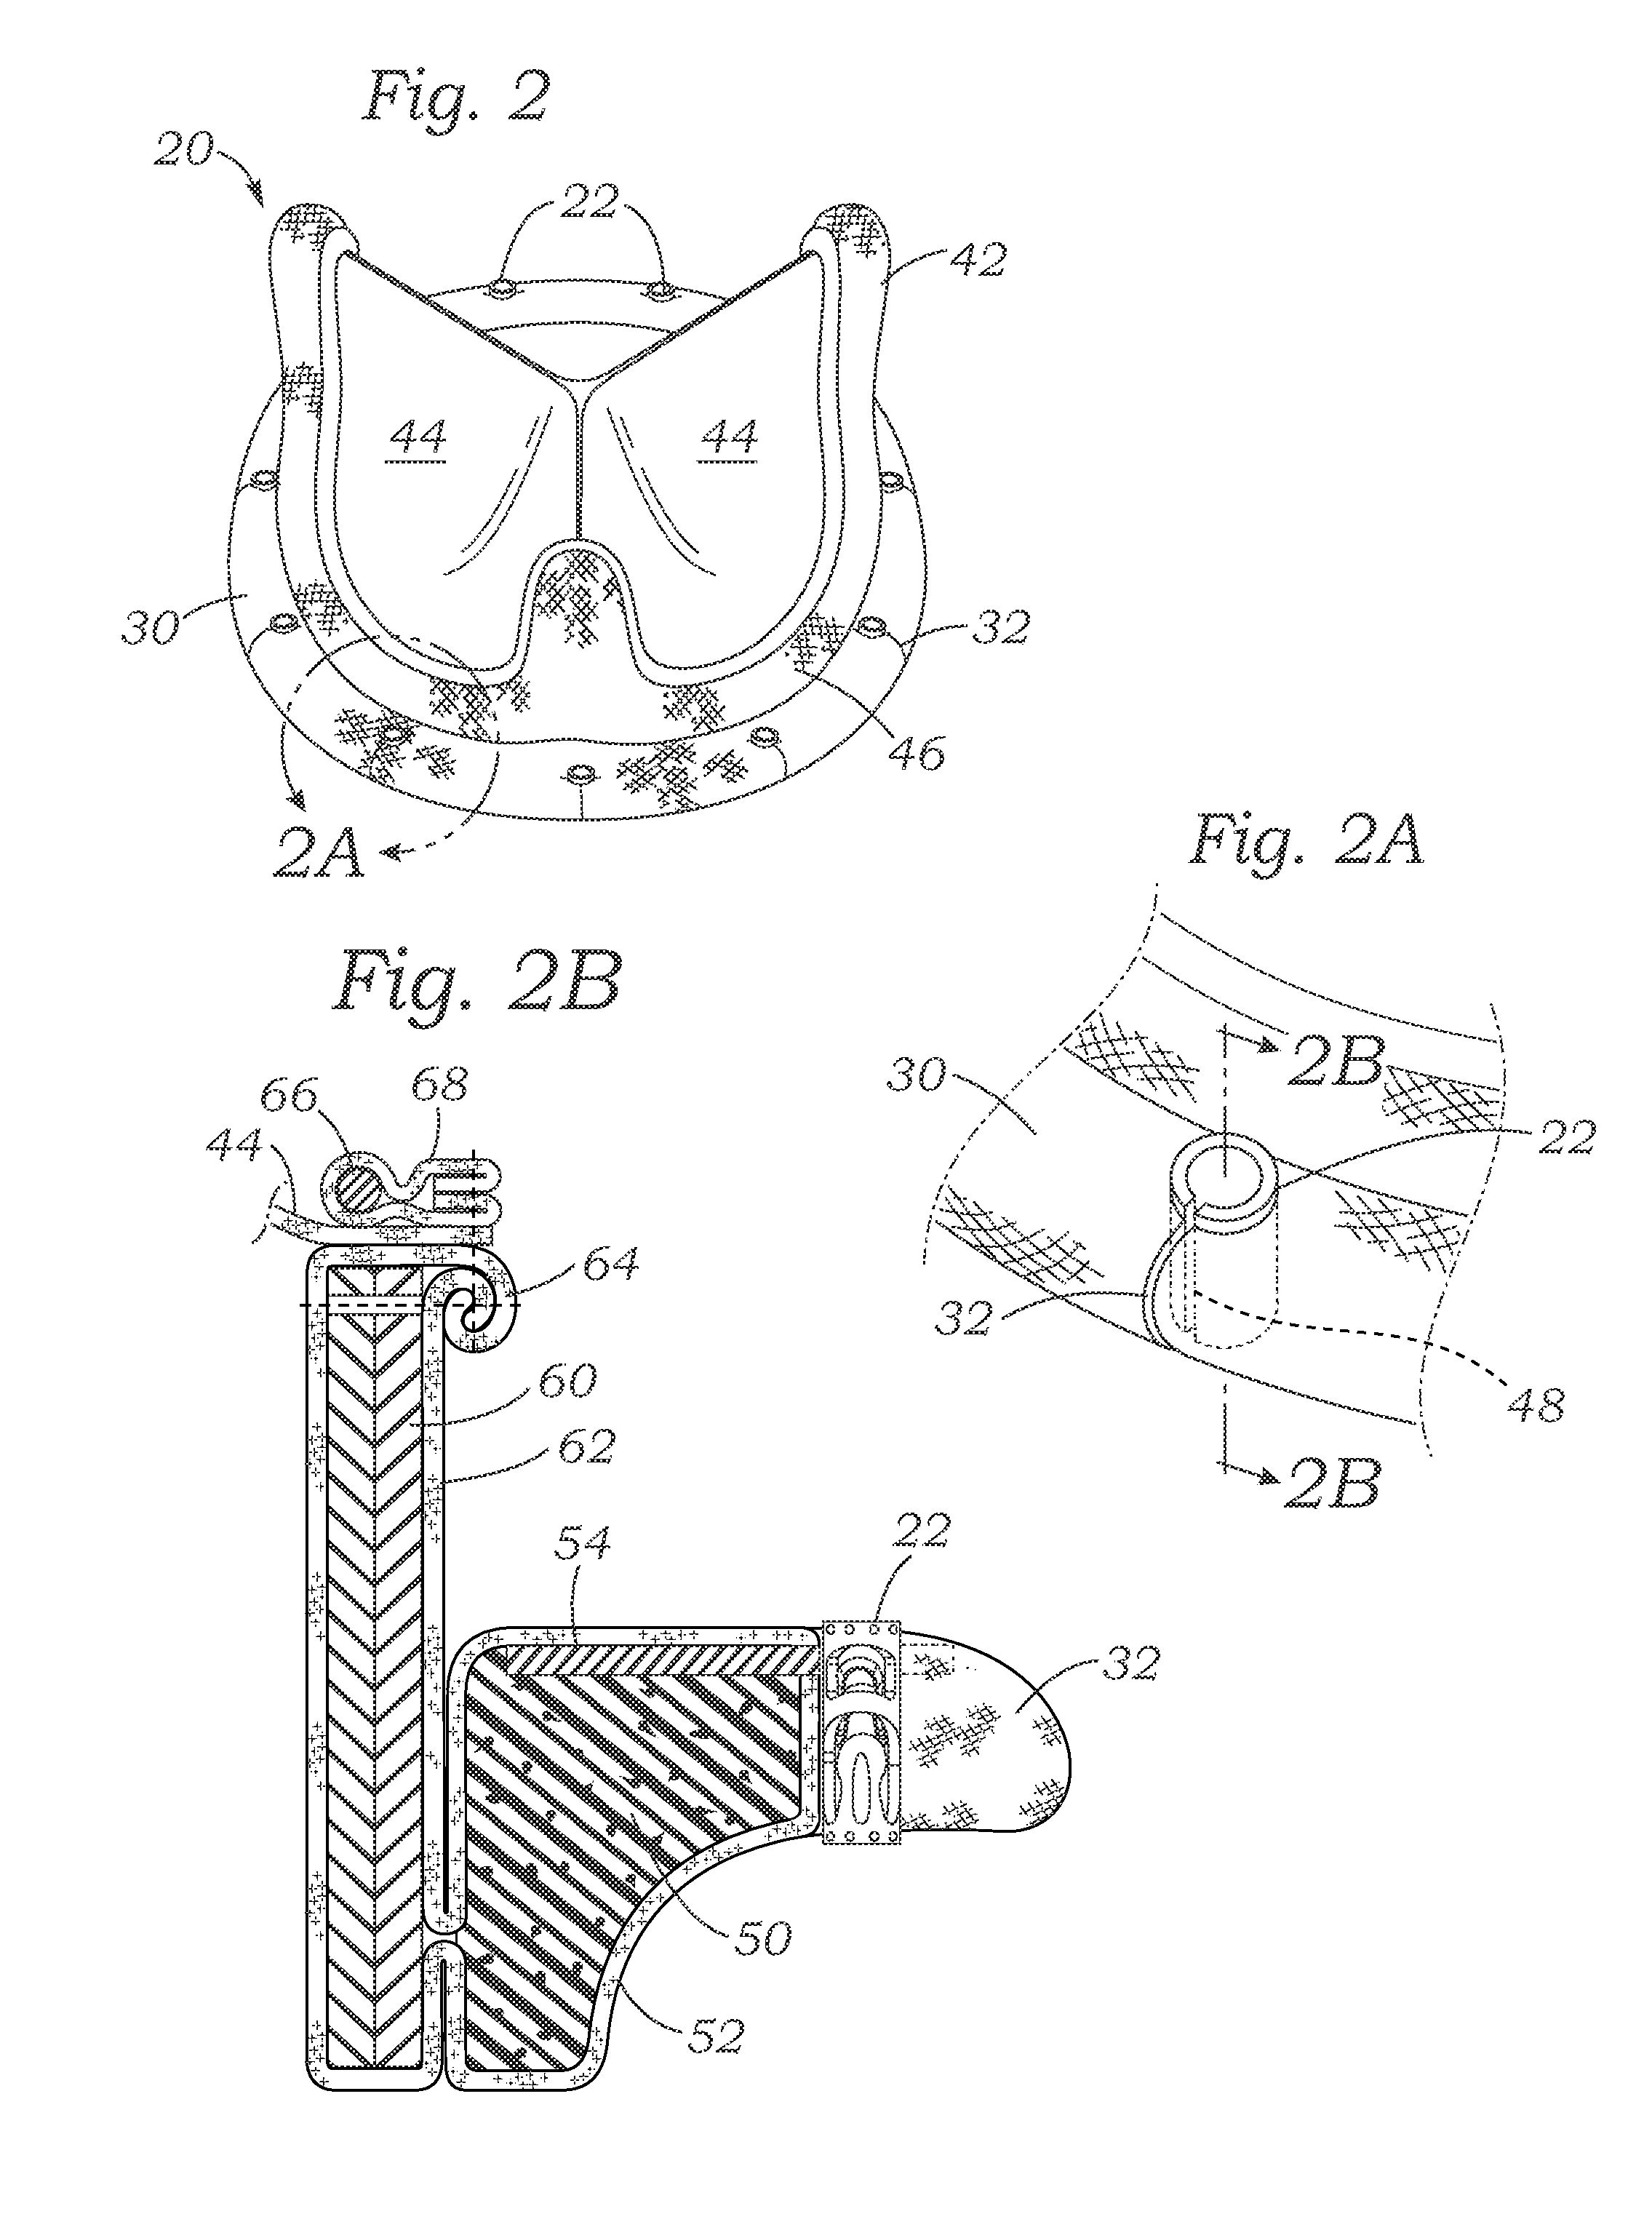 Cardiac implant with integrated suture fasteners